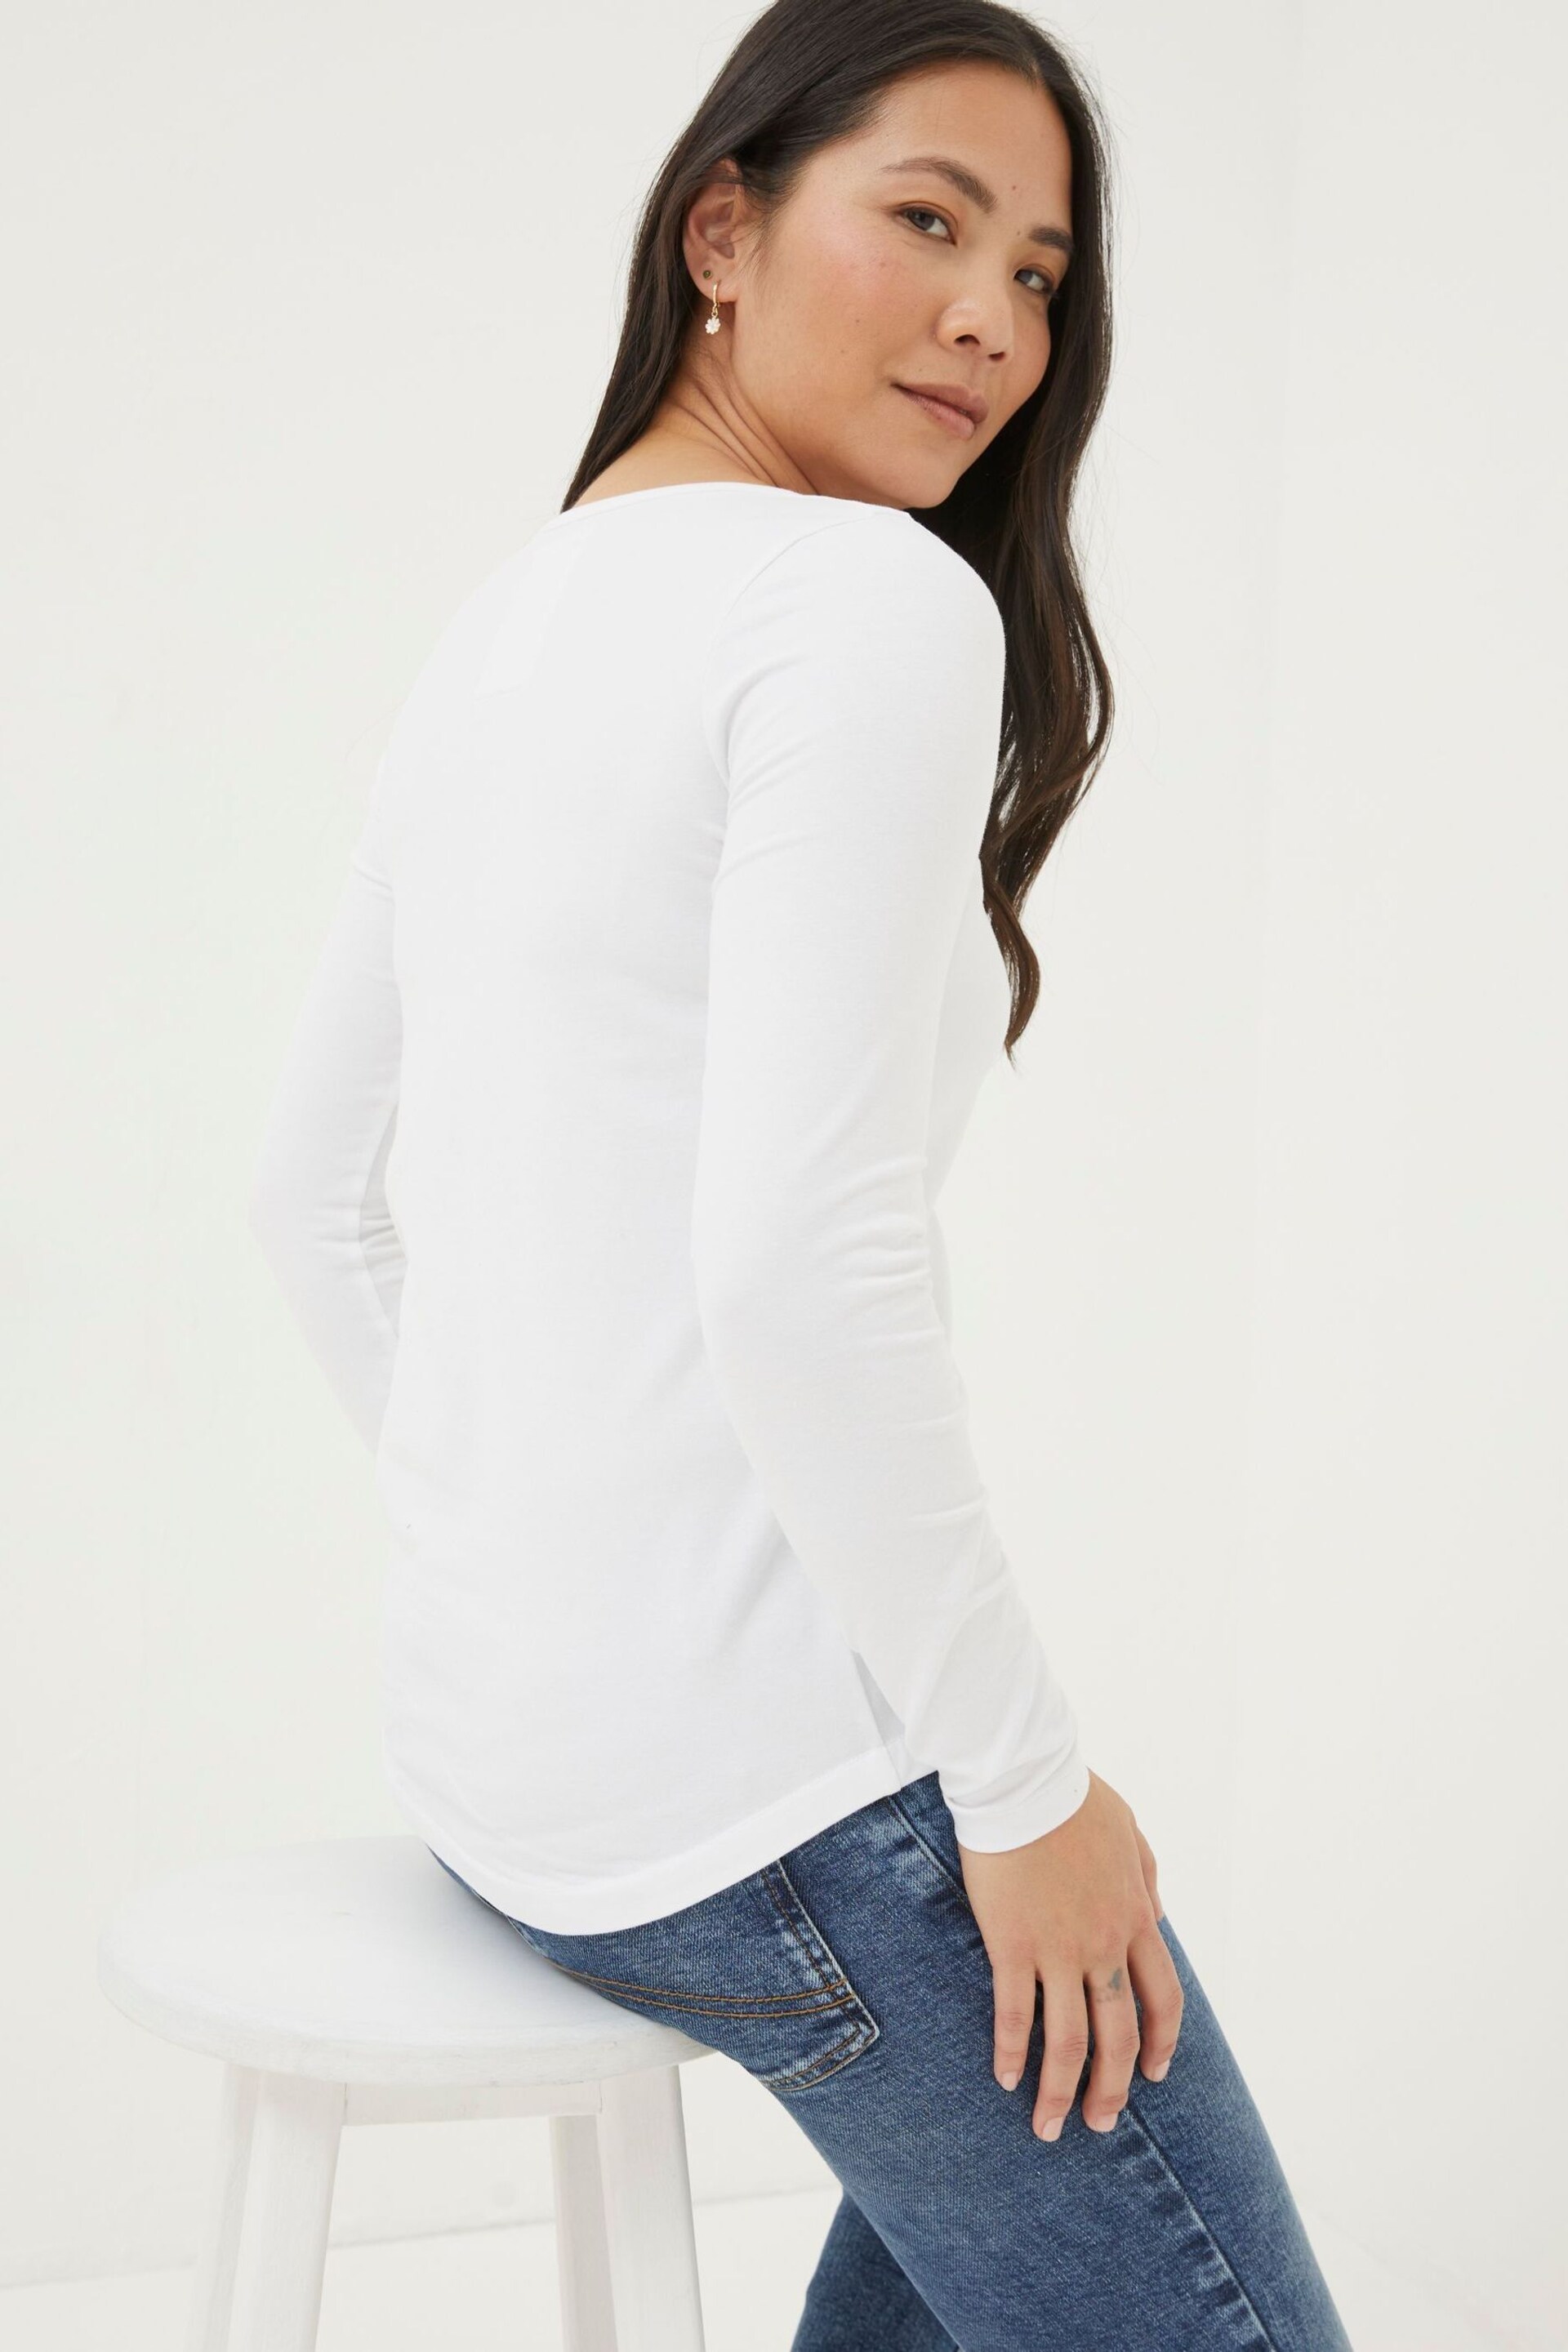 FatFace White T-Shirt - Image 2 of 4